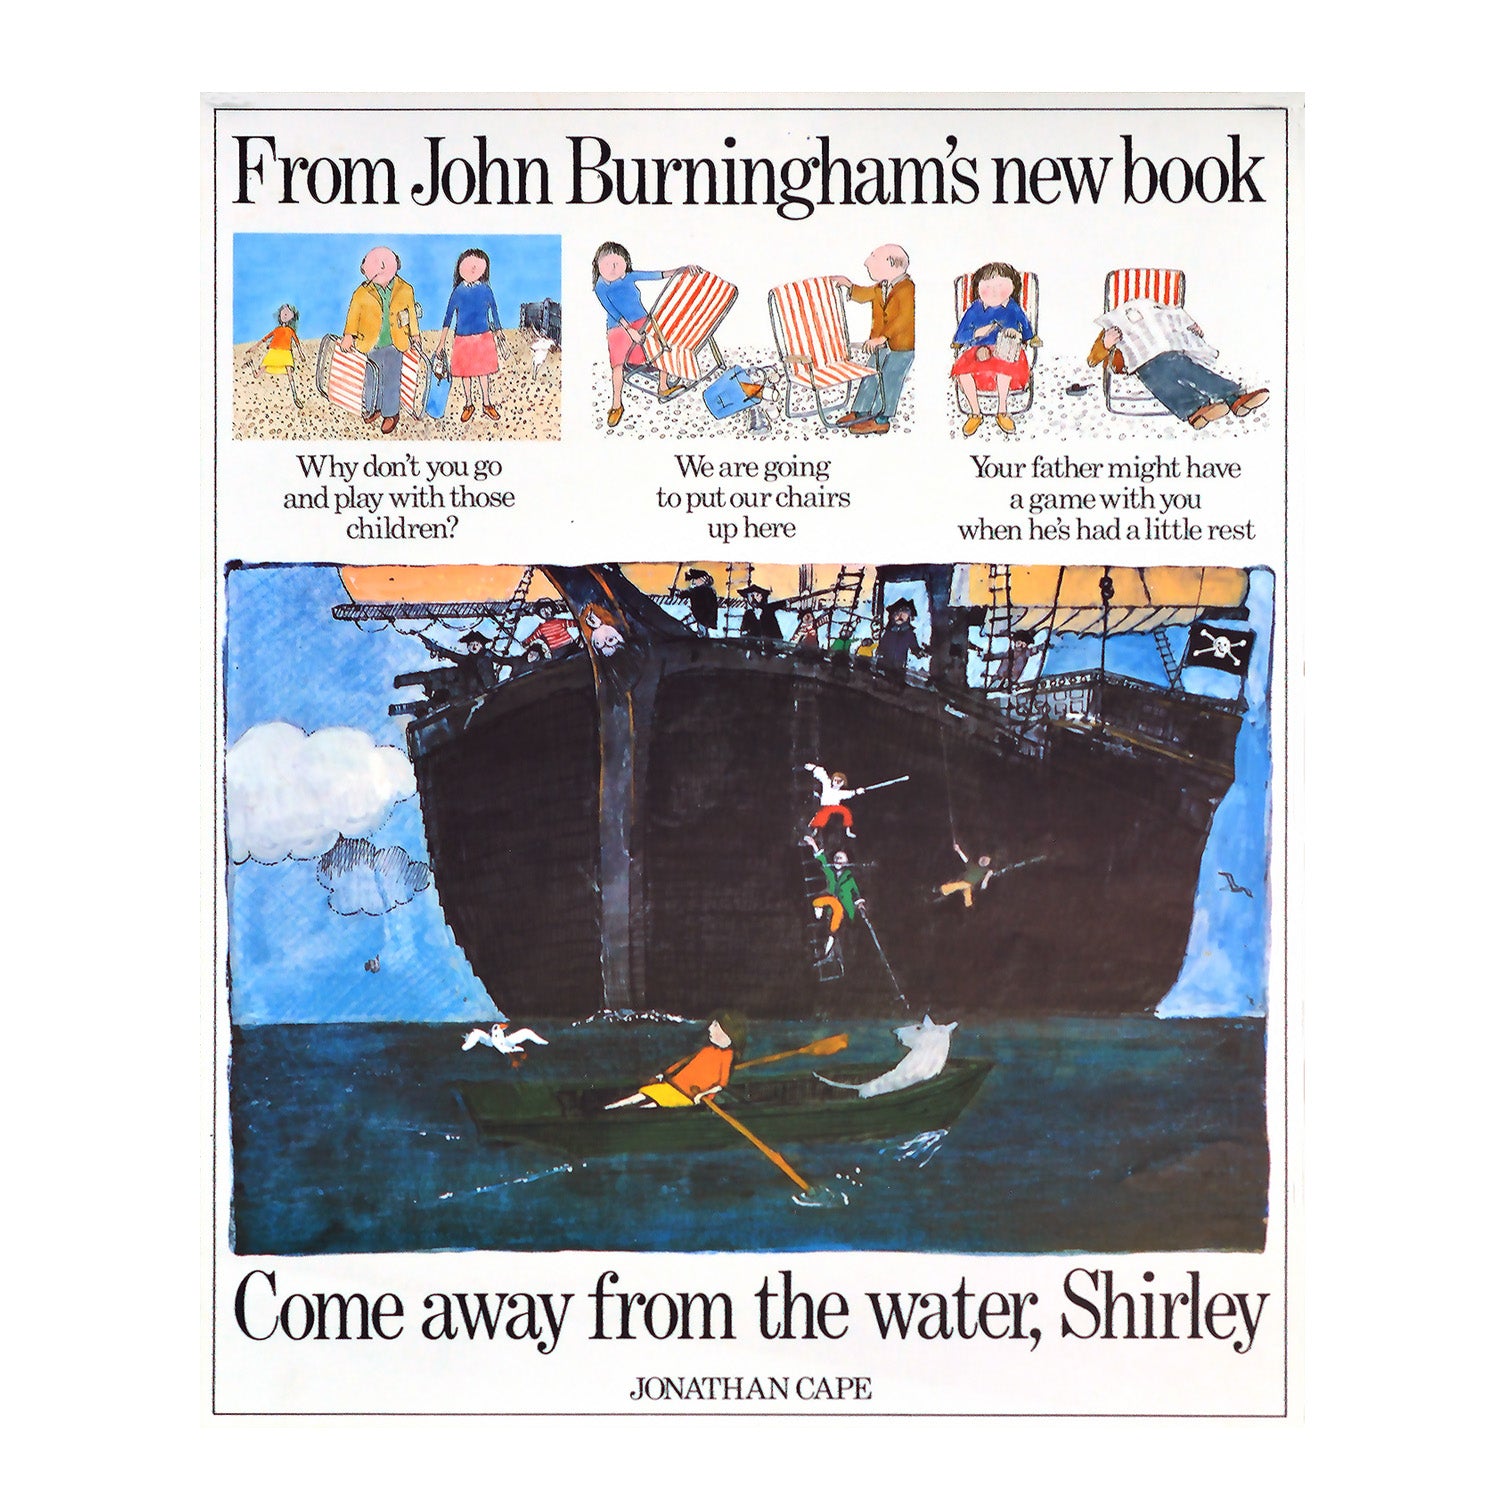 original promotional poster for John Burningham's illustrated children's story Come away from the water, Shirley, 1977. Illustrations from book including pirate ship and family with deck chairs on a beach